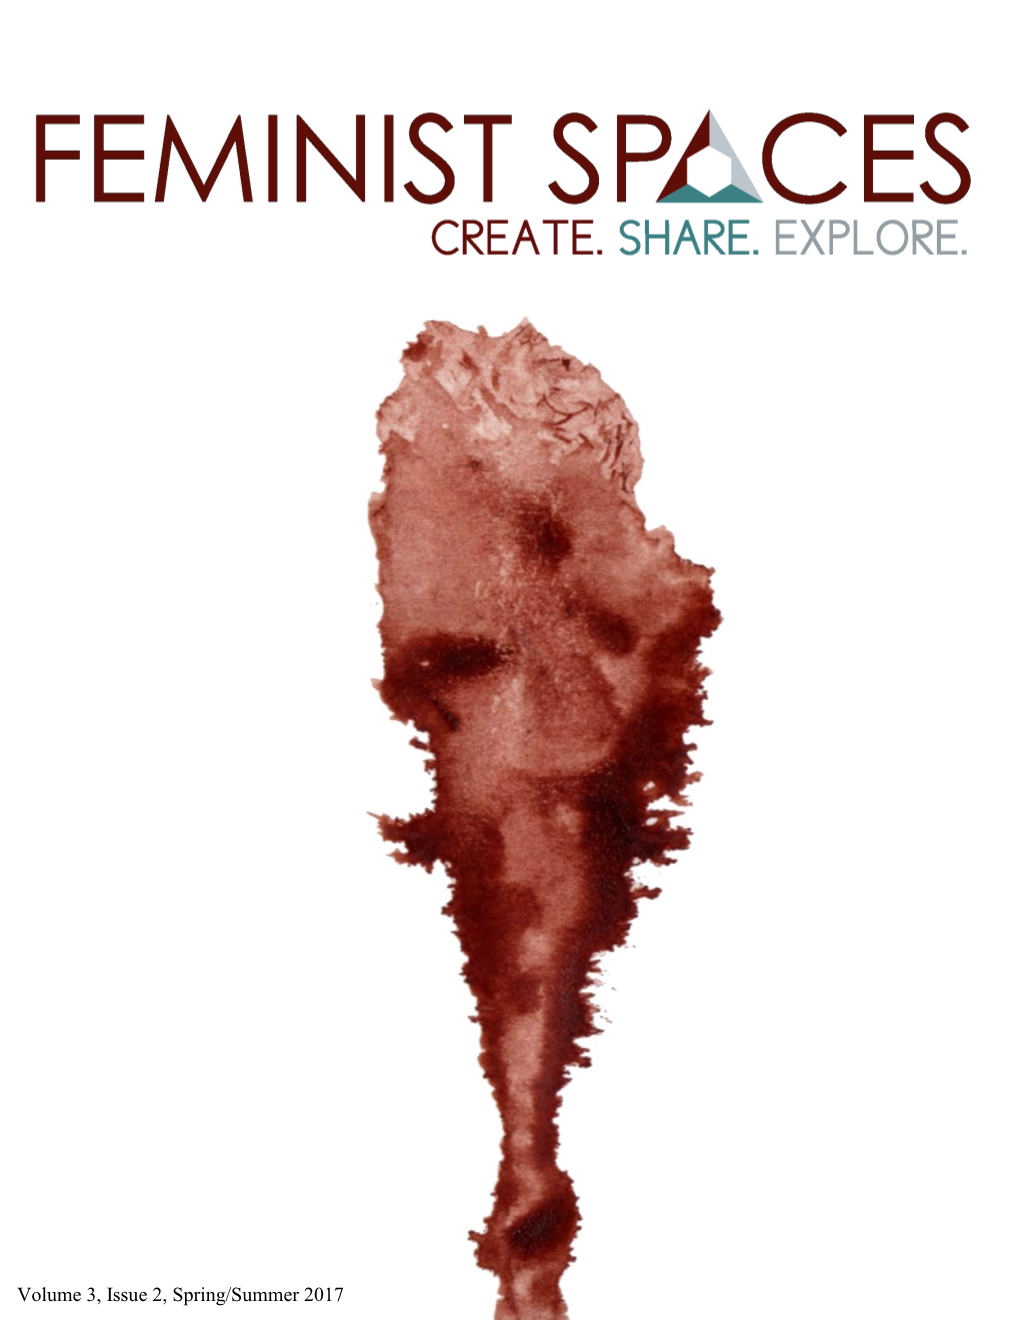 Feminist Spaces Journal May Not: I